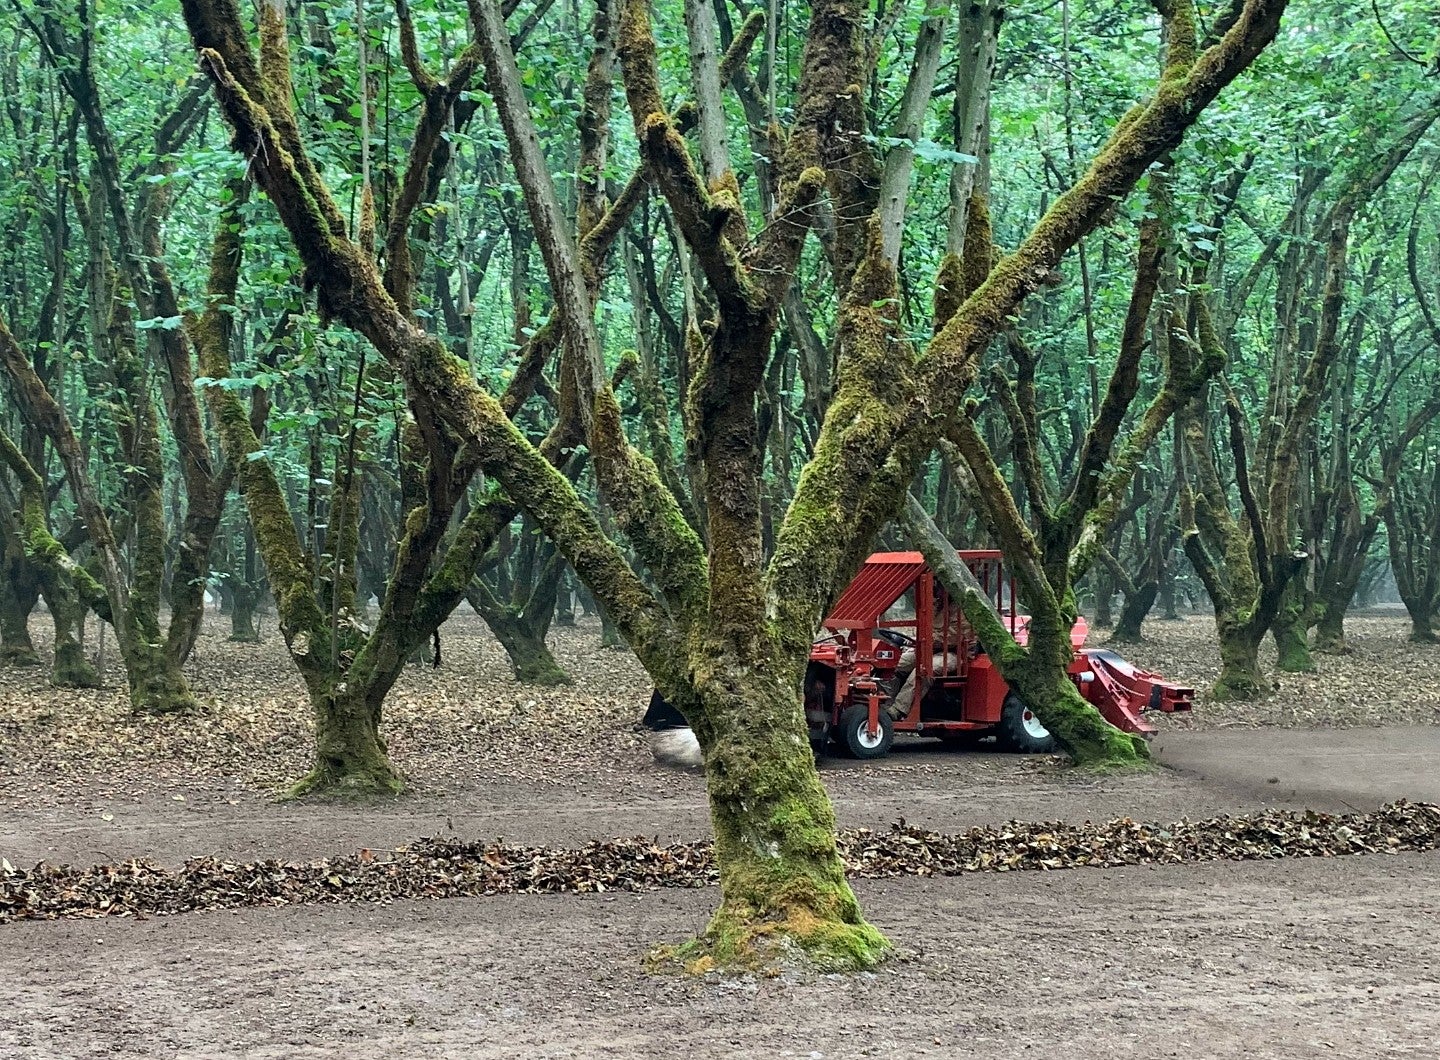 hazelnut orchard with harvester equipment among trees